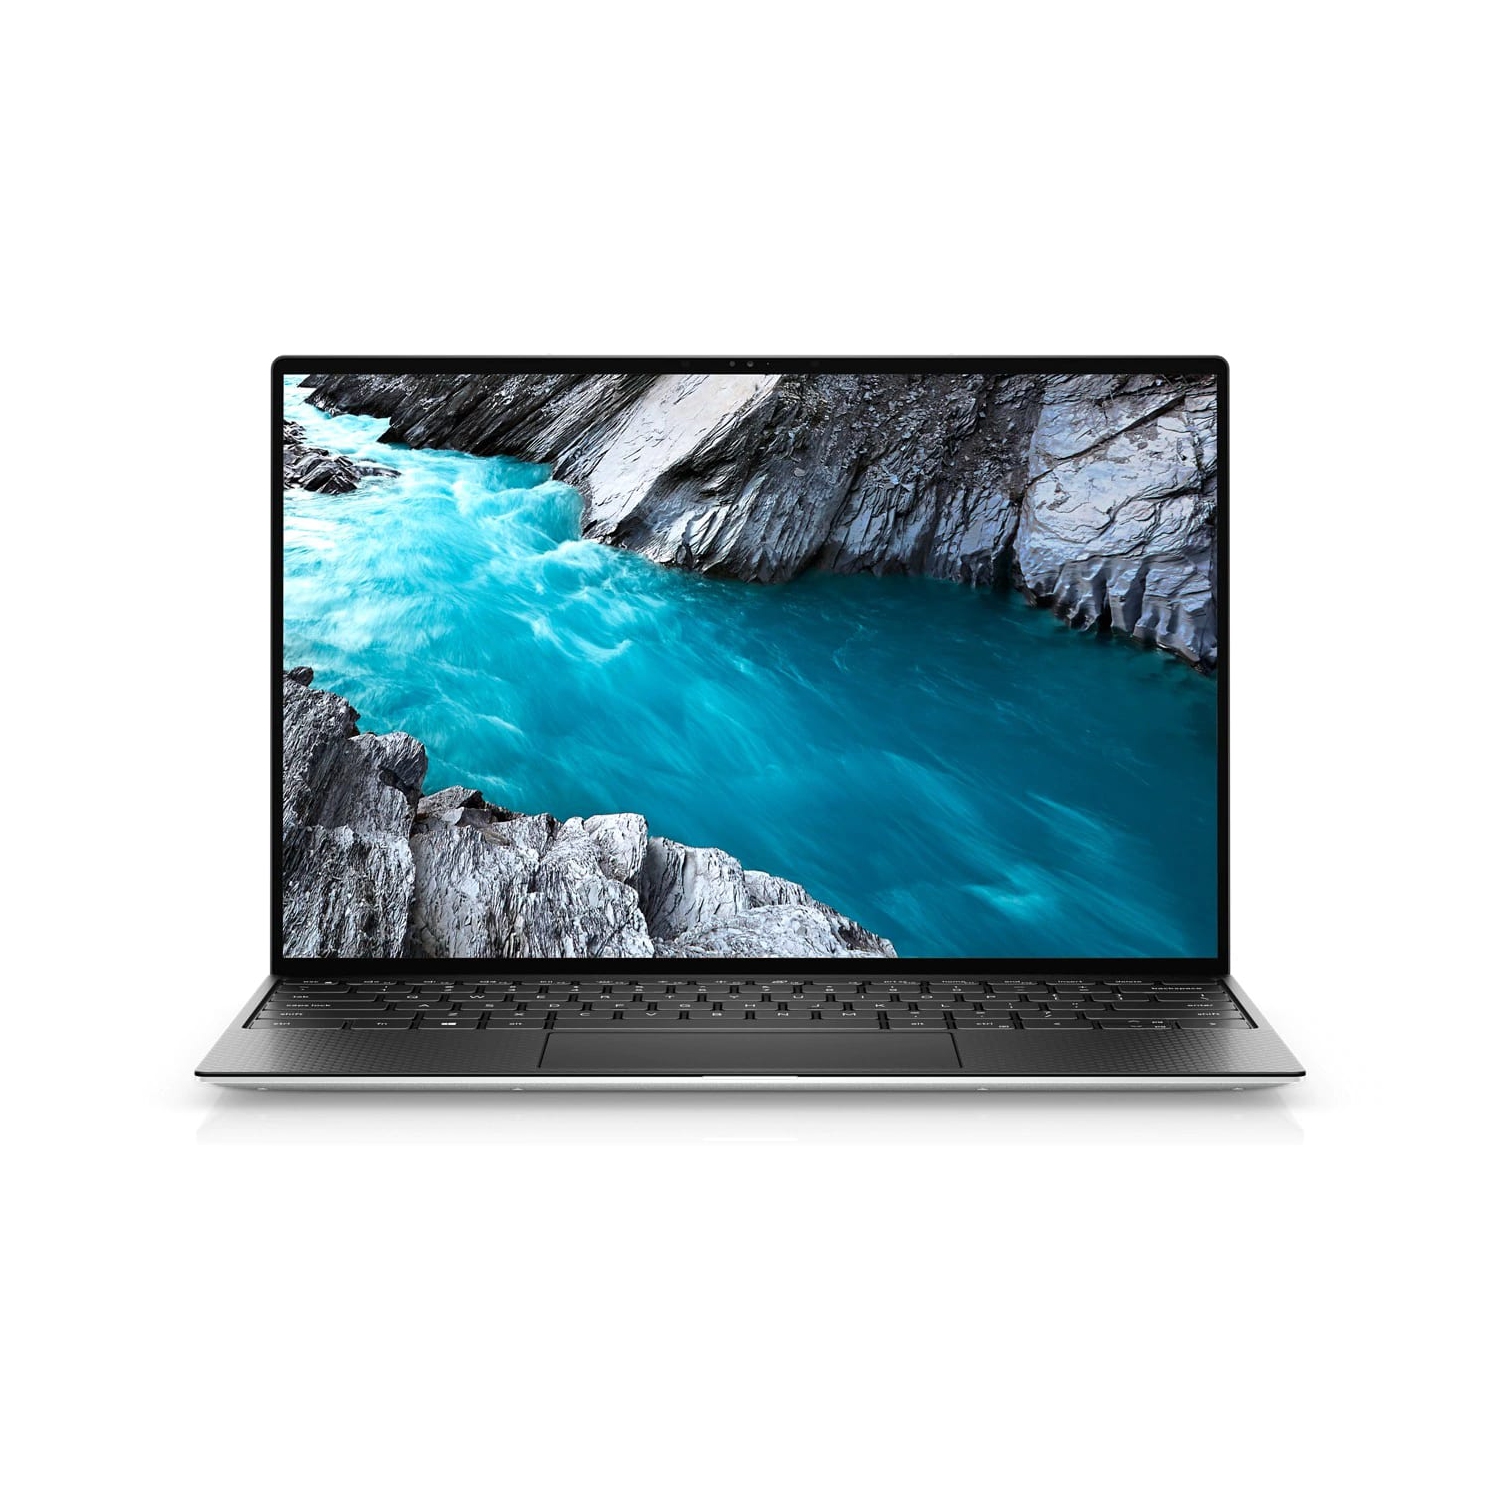 Refurbished (Excellent) - Dell XPS 13 9310 Laptop (2020) | 13.4" FHD+ Touch | Core i7 - 256GB SSD - 16GB RAM | 4 Cores @ 4.4 GHz - 11th Gen CPU Certified Refurbished